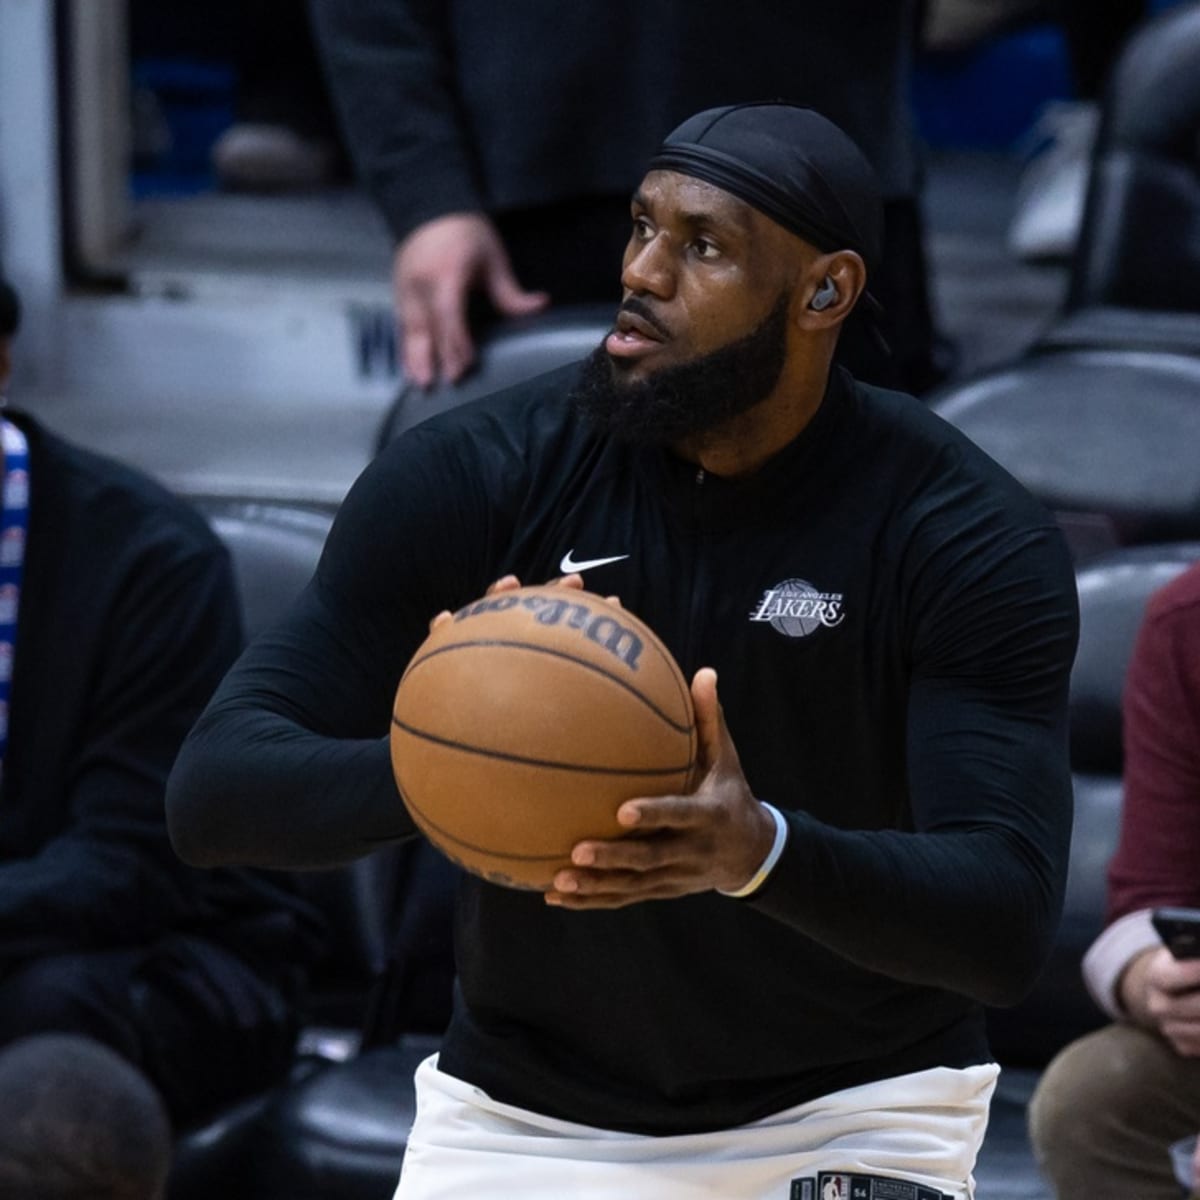 LeBron James's Royal Oak Is Huge—There's a Surprising Reason For That